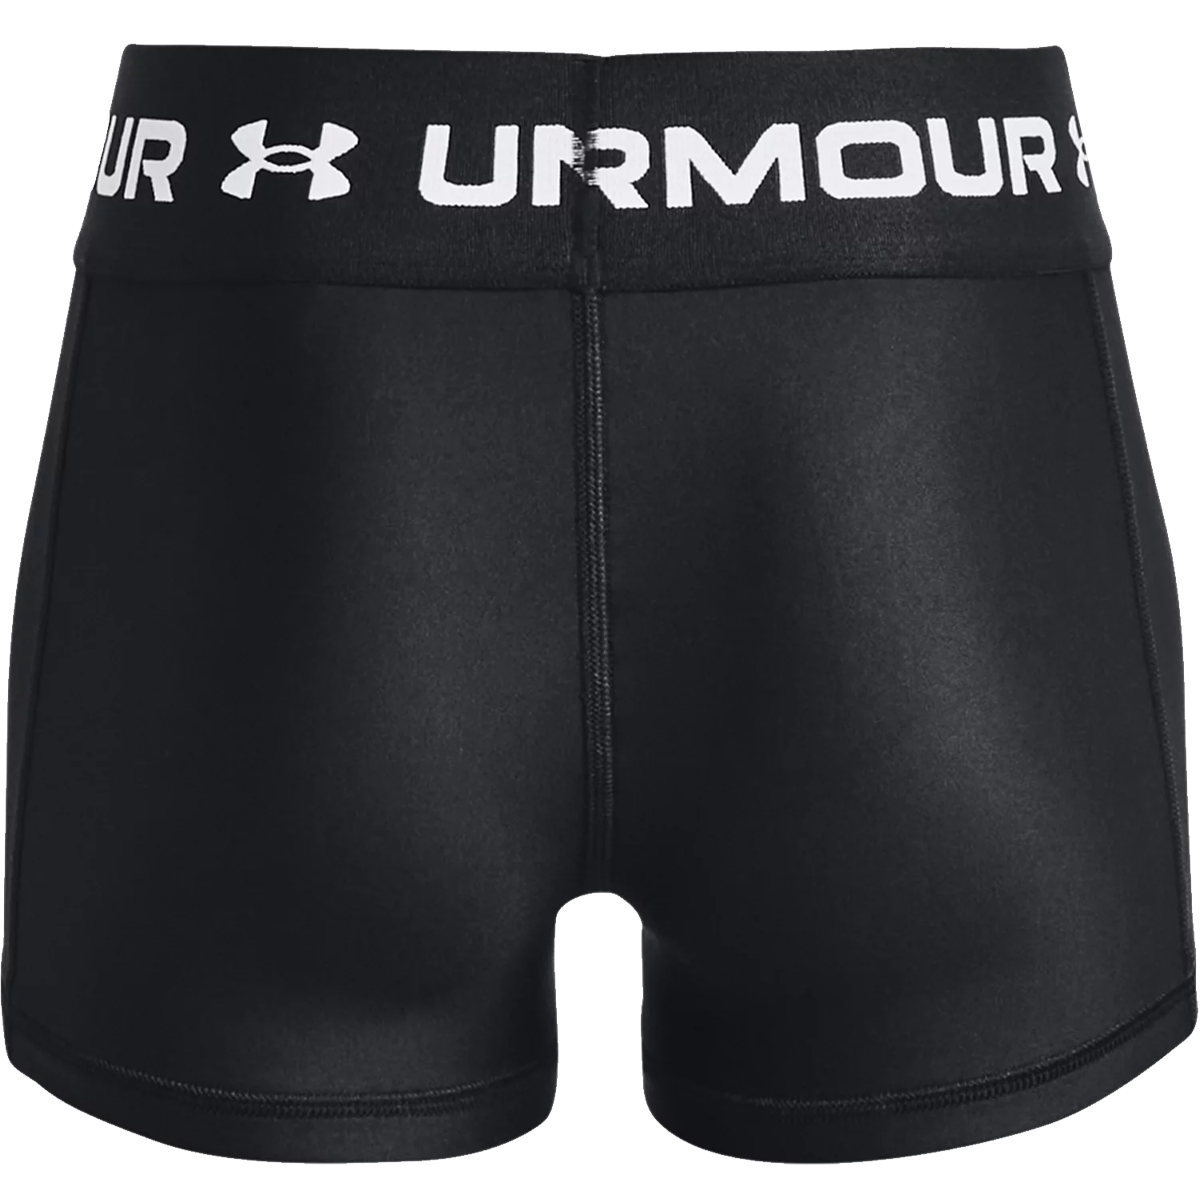 Youth HeatGear Armour Shorty alternate view